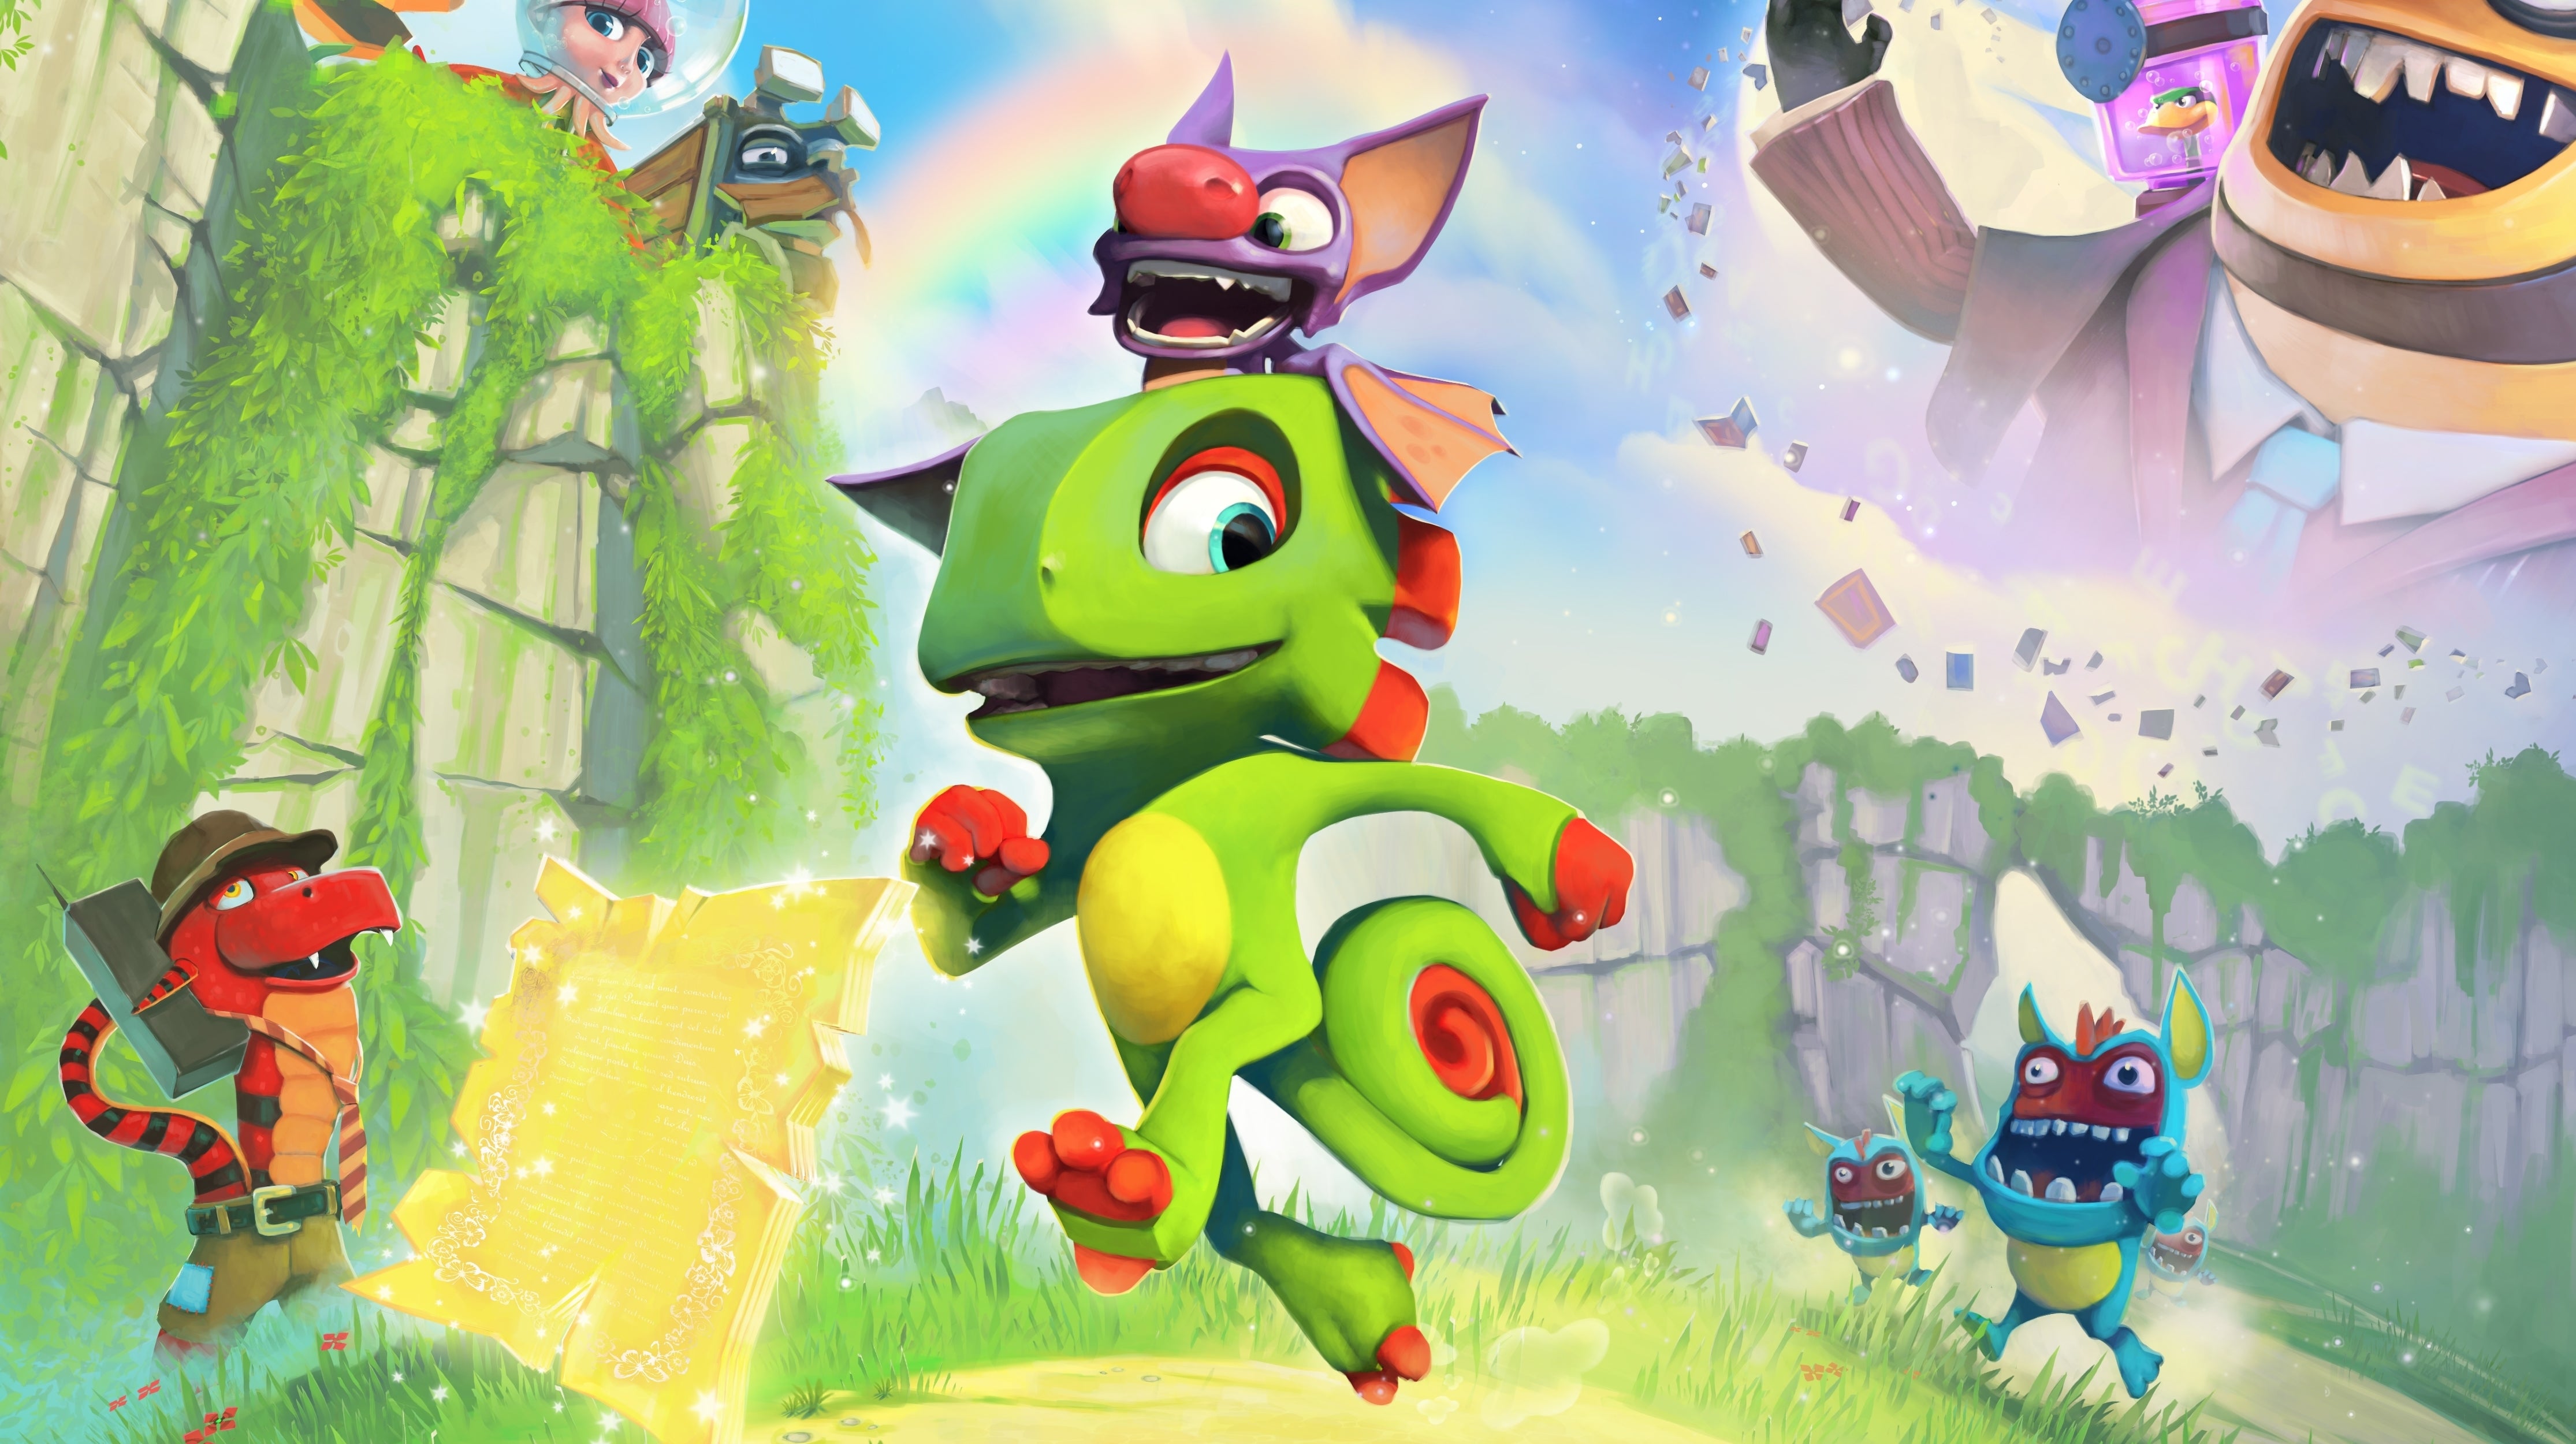 Image for Yooka-Laylee and Void Bastards are currently free on the Epic Games Store